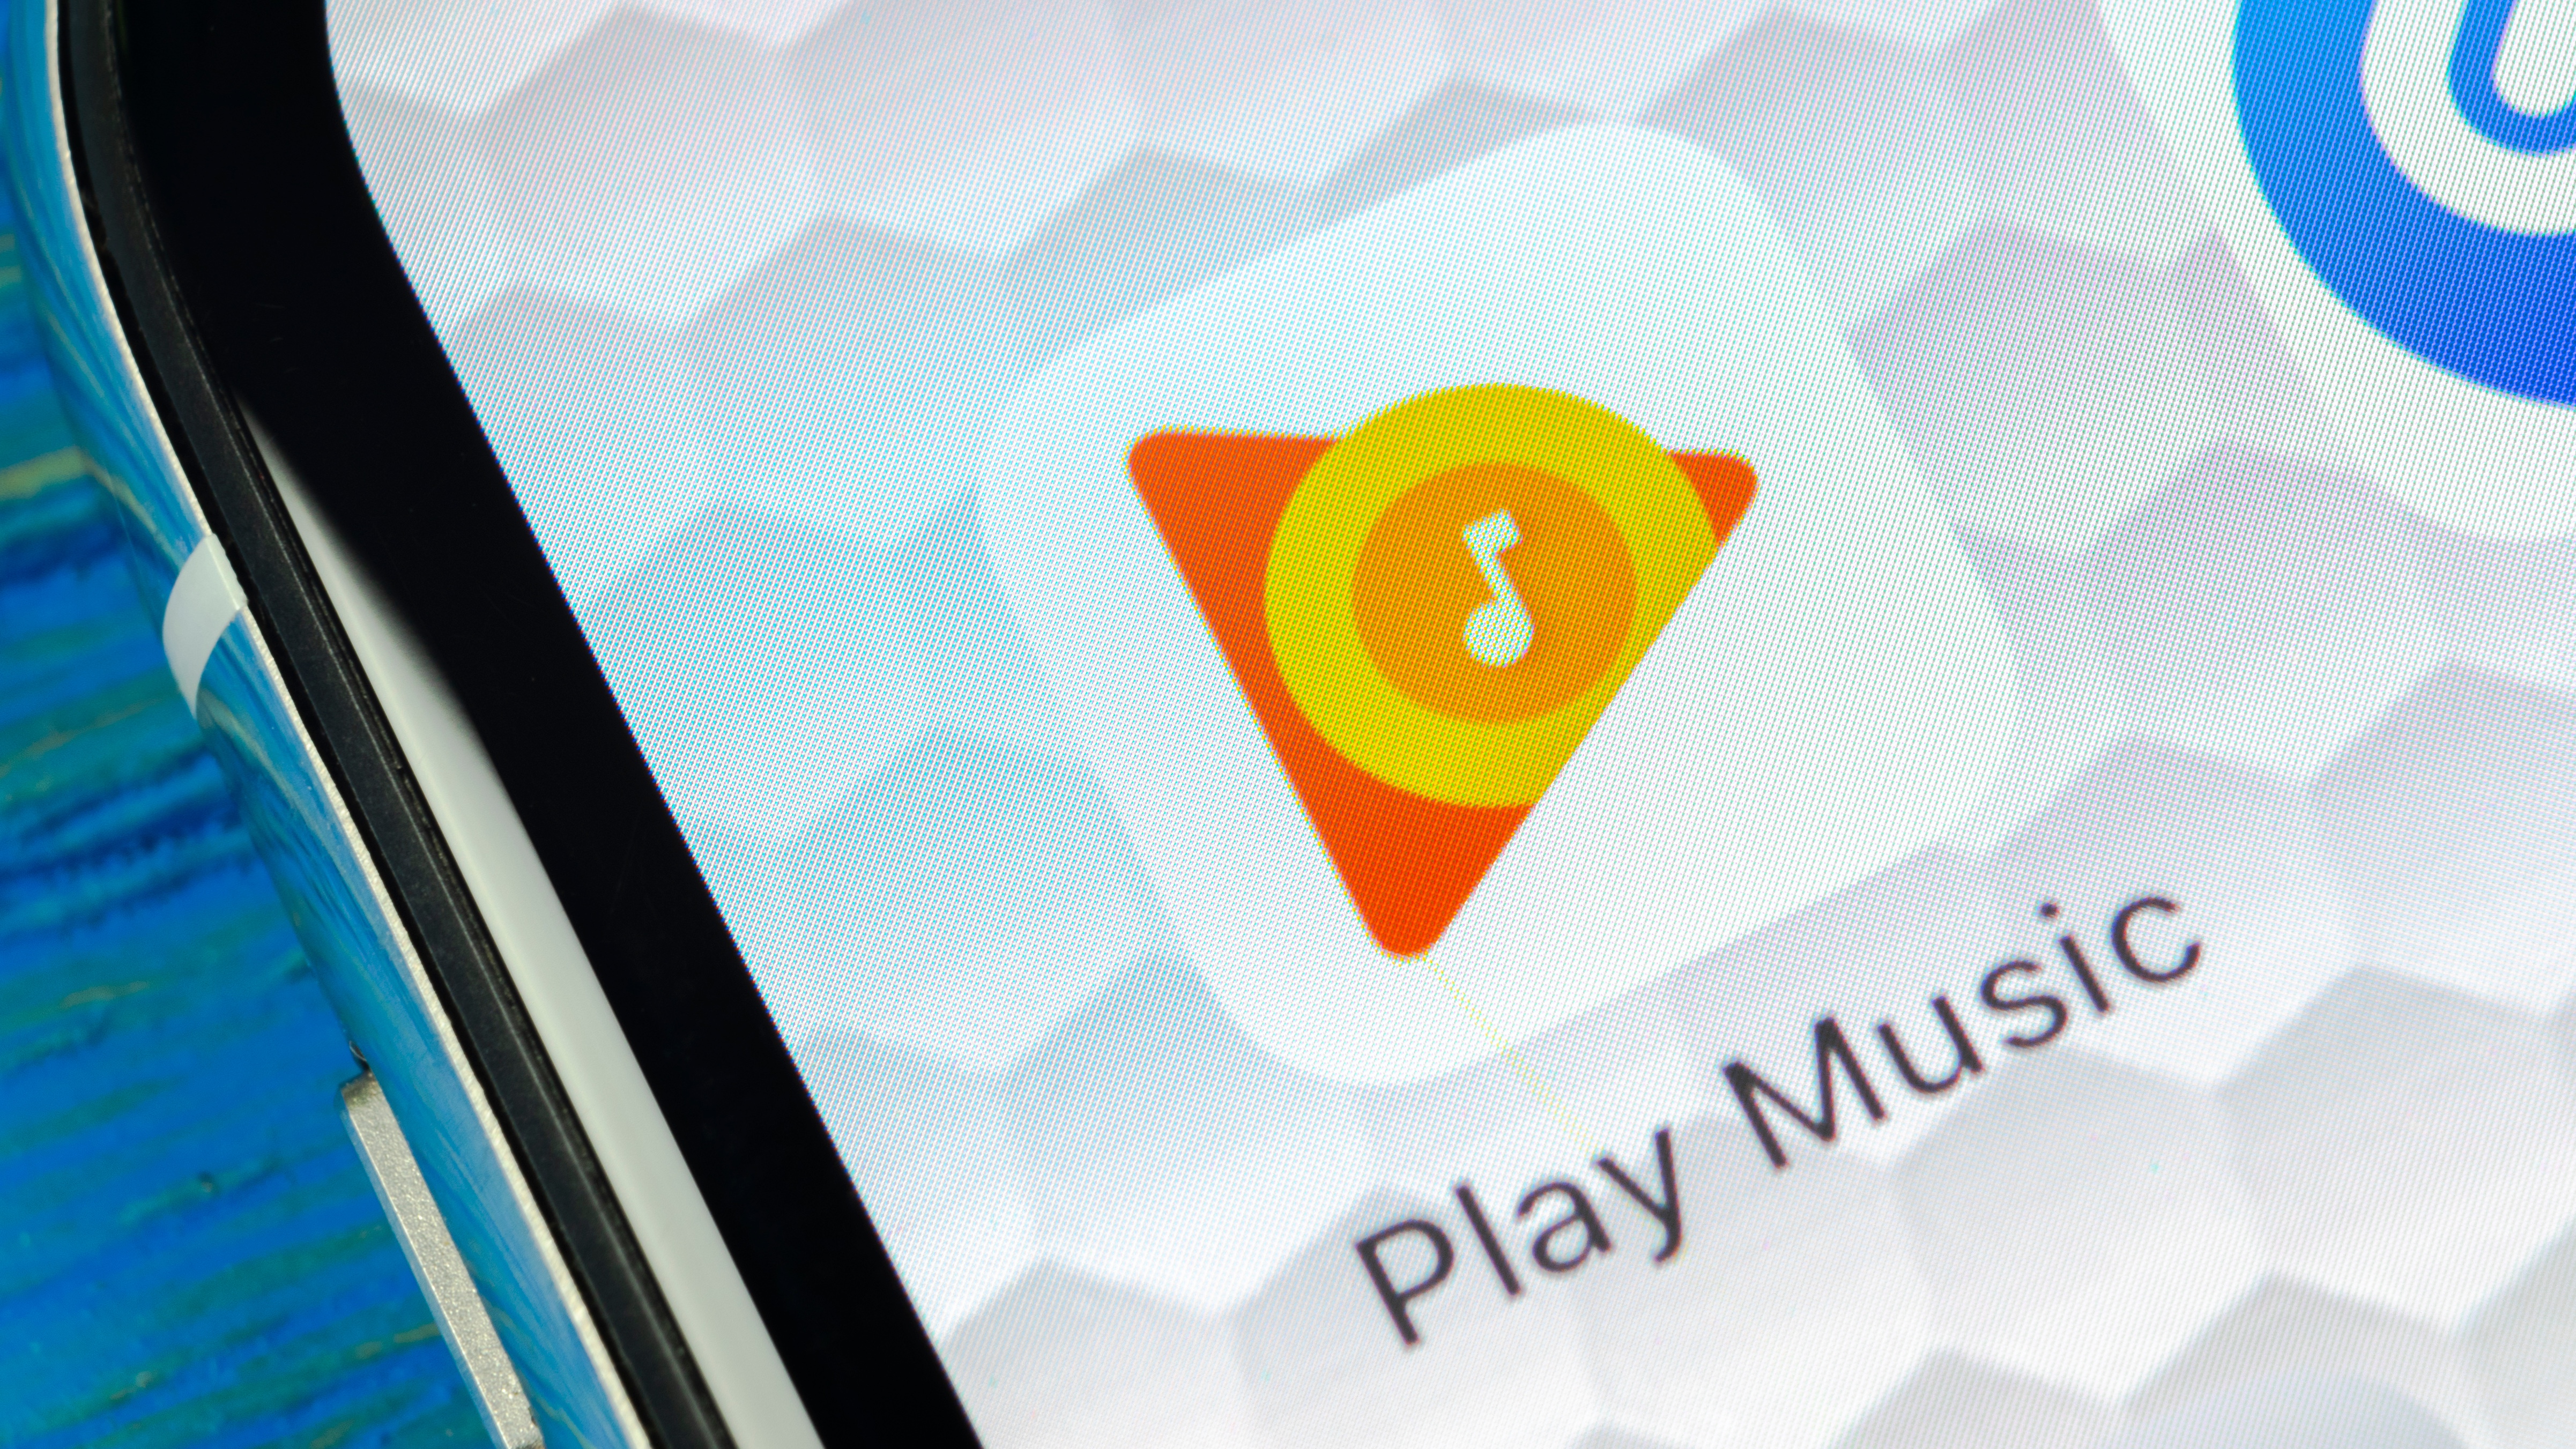 google music download 1 song